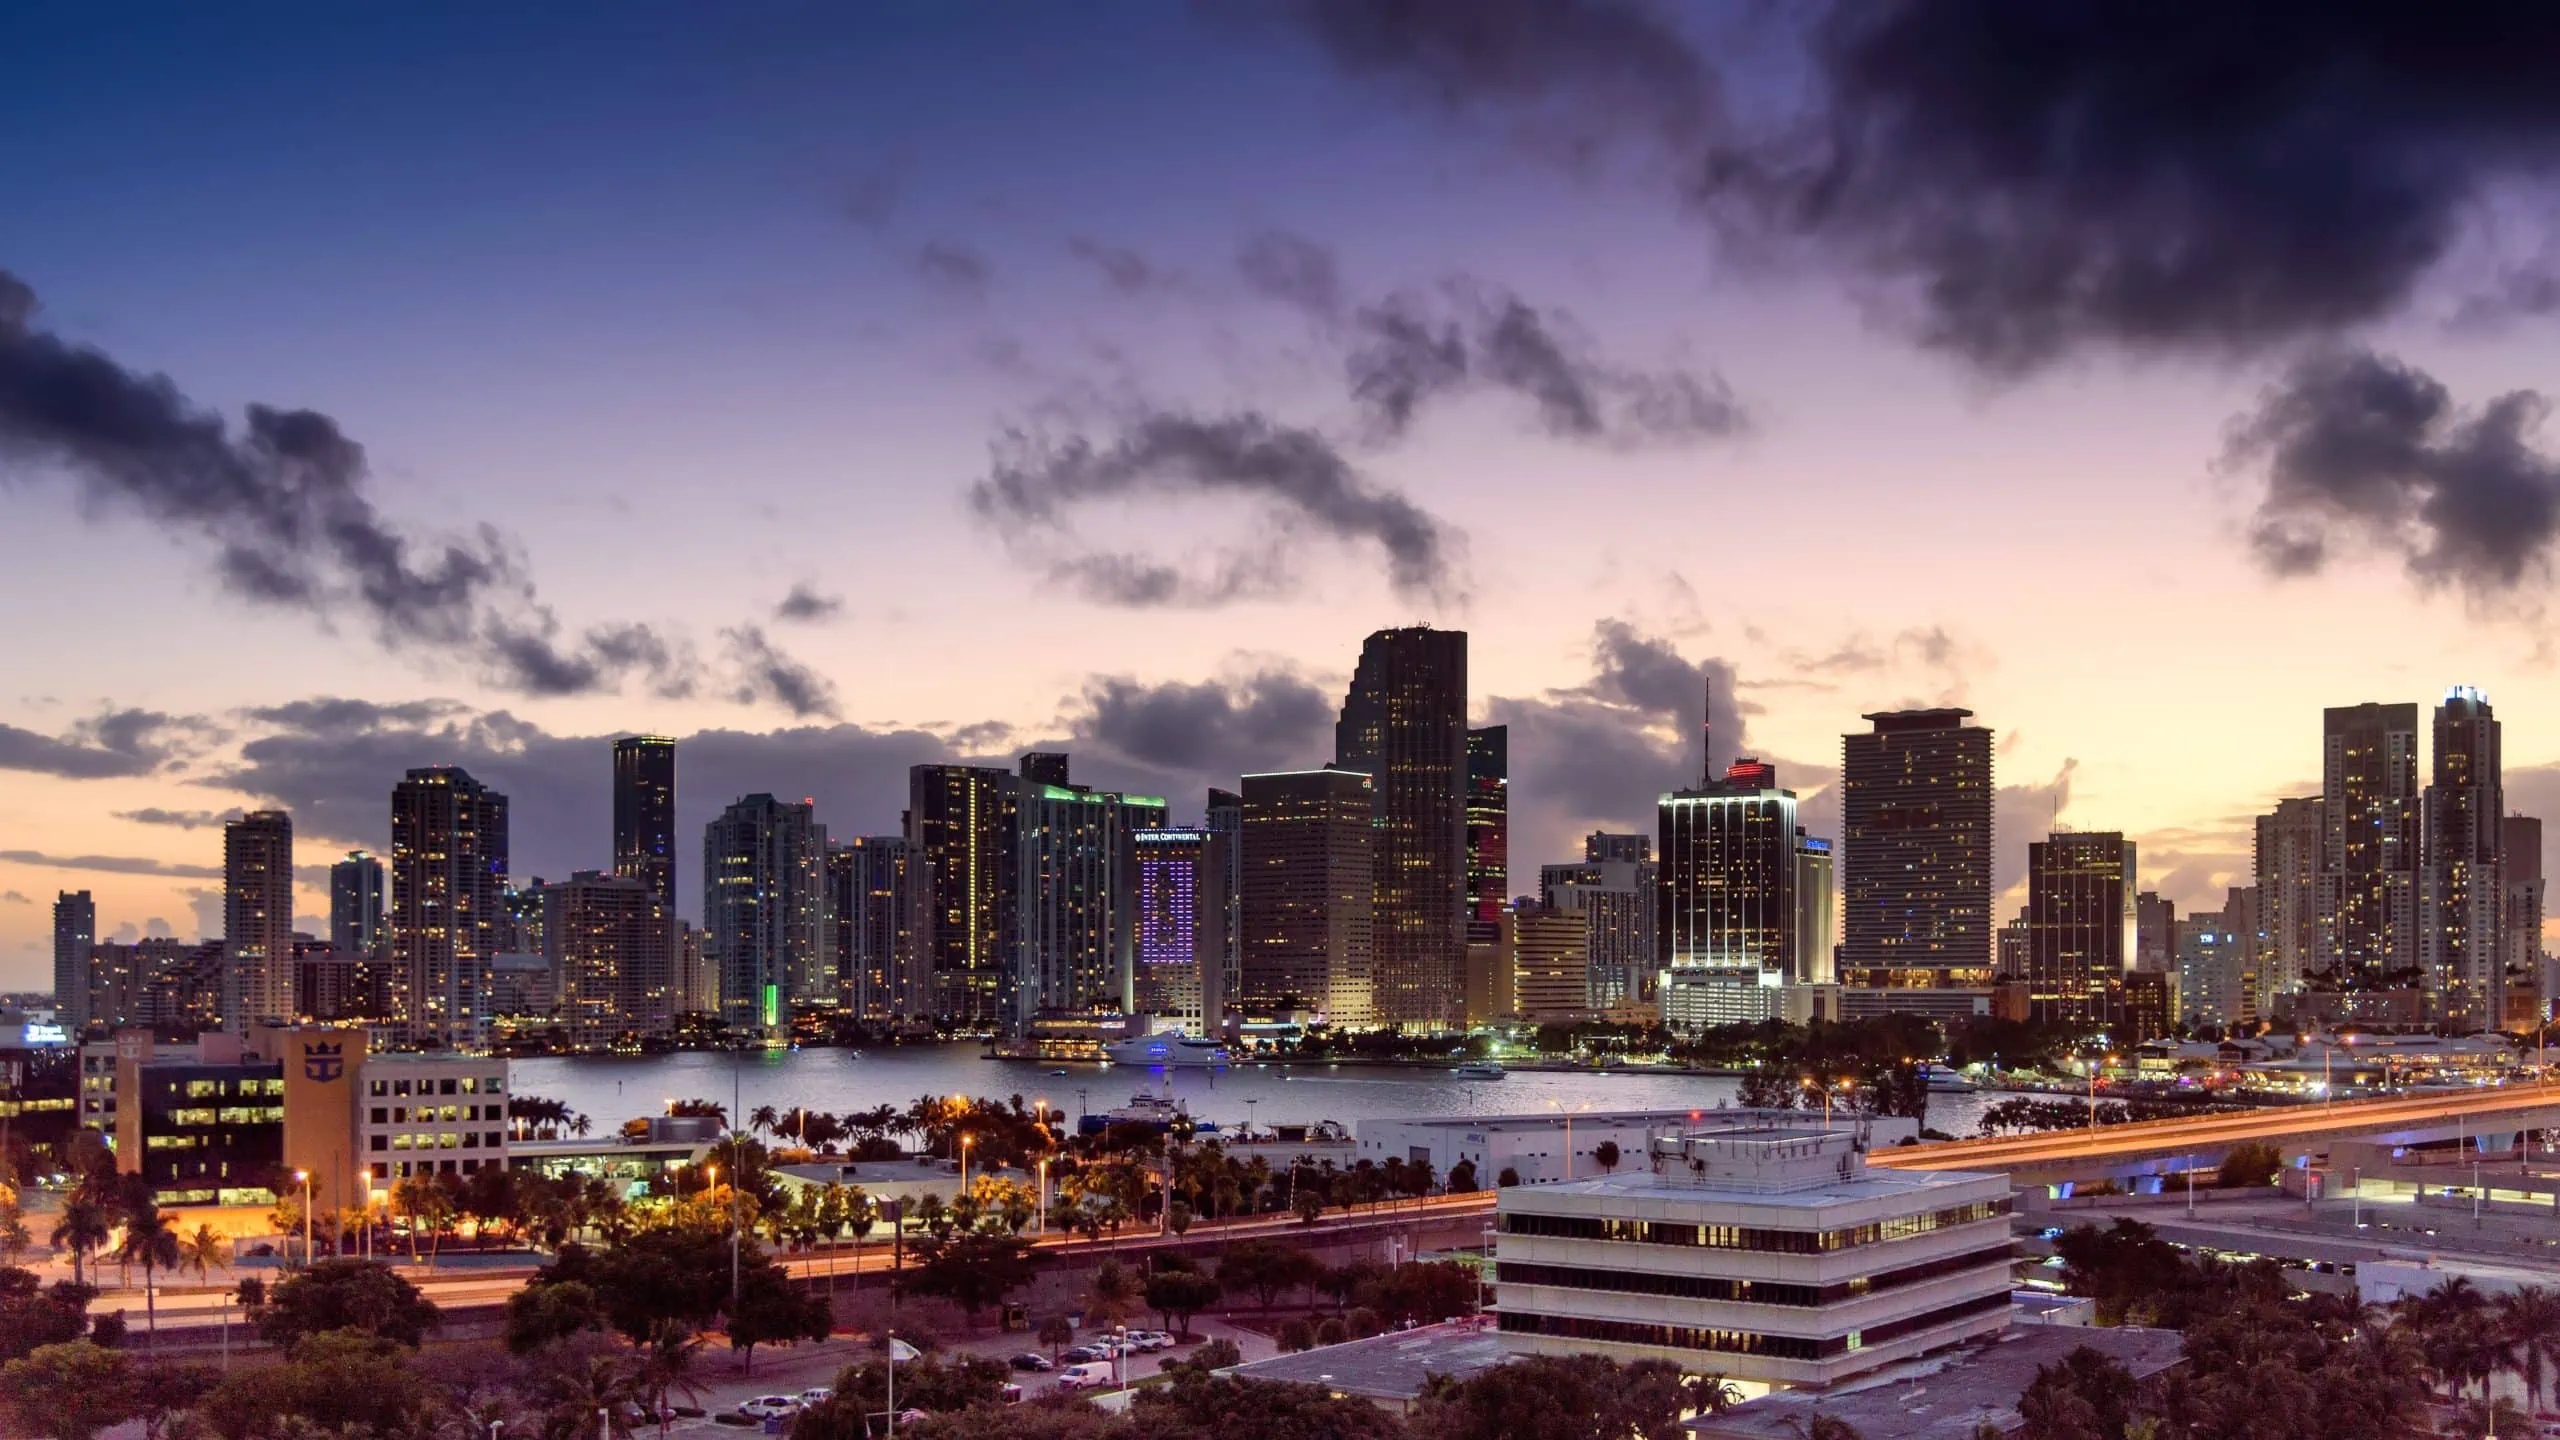 Skyline of Downtown Miami full of enterprises with security cameras